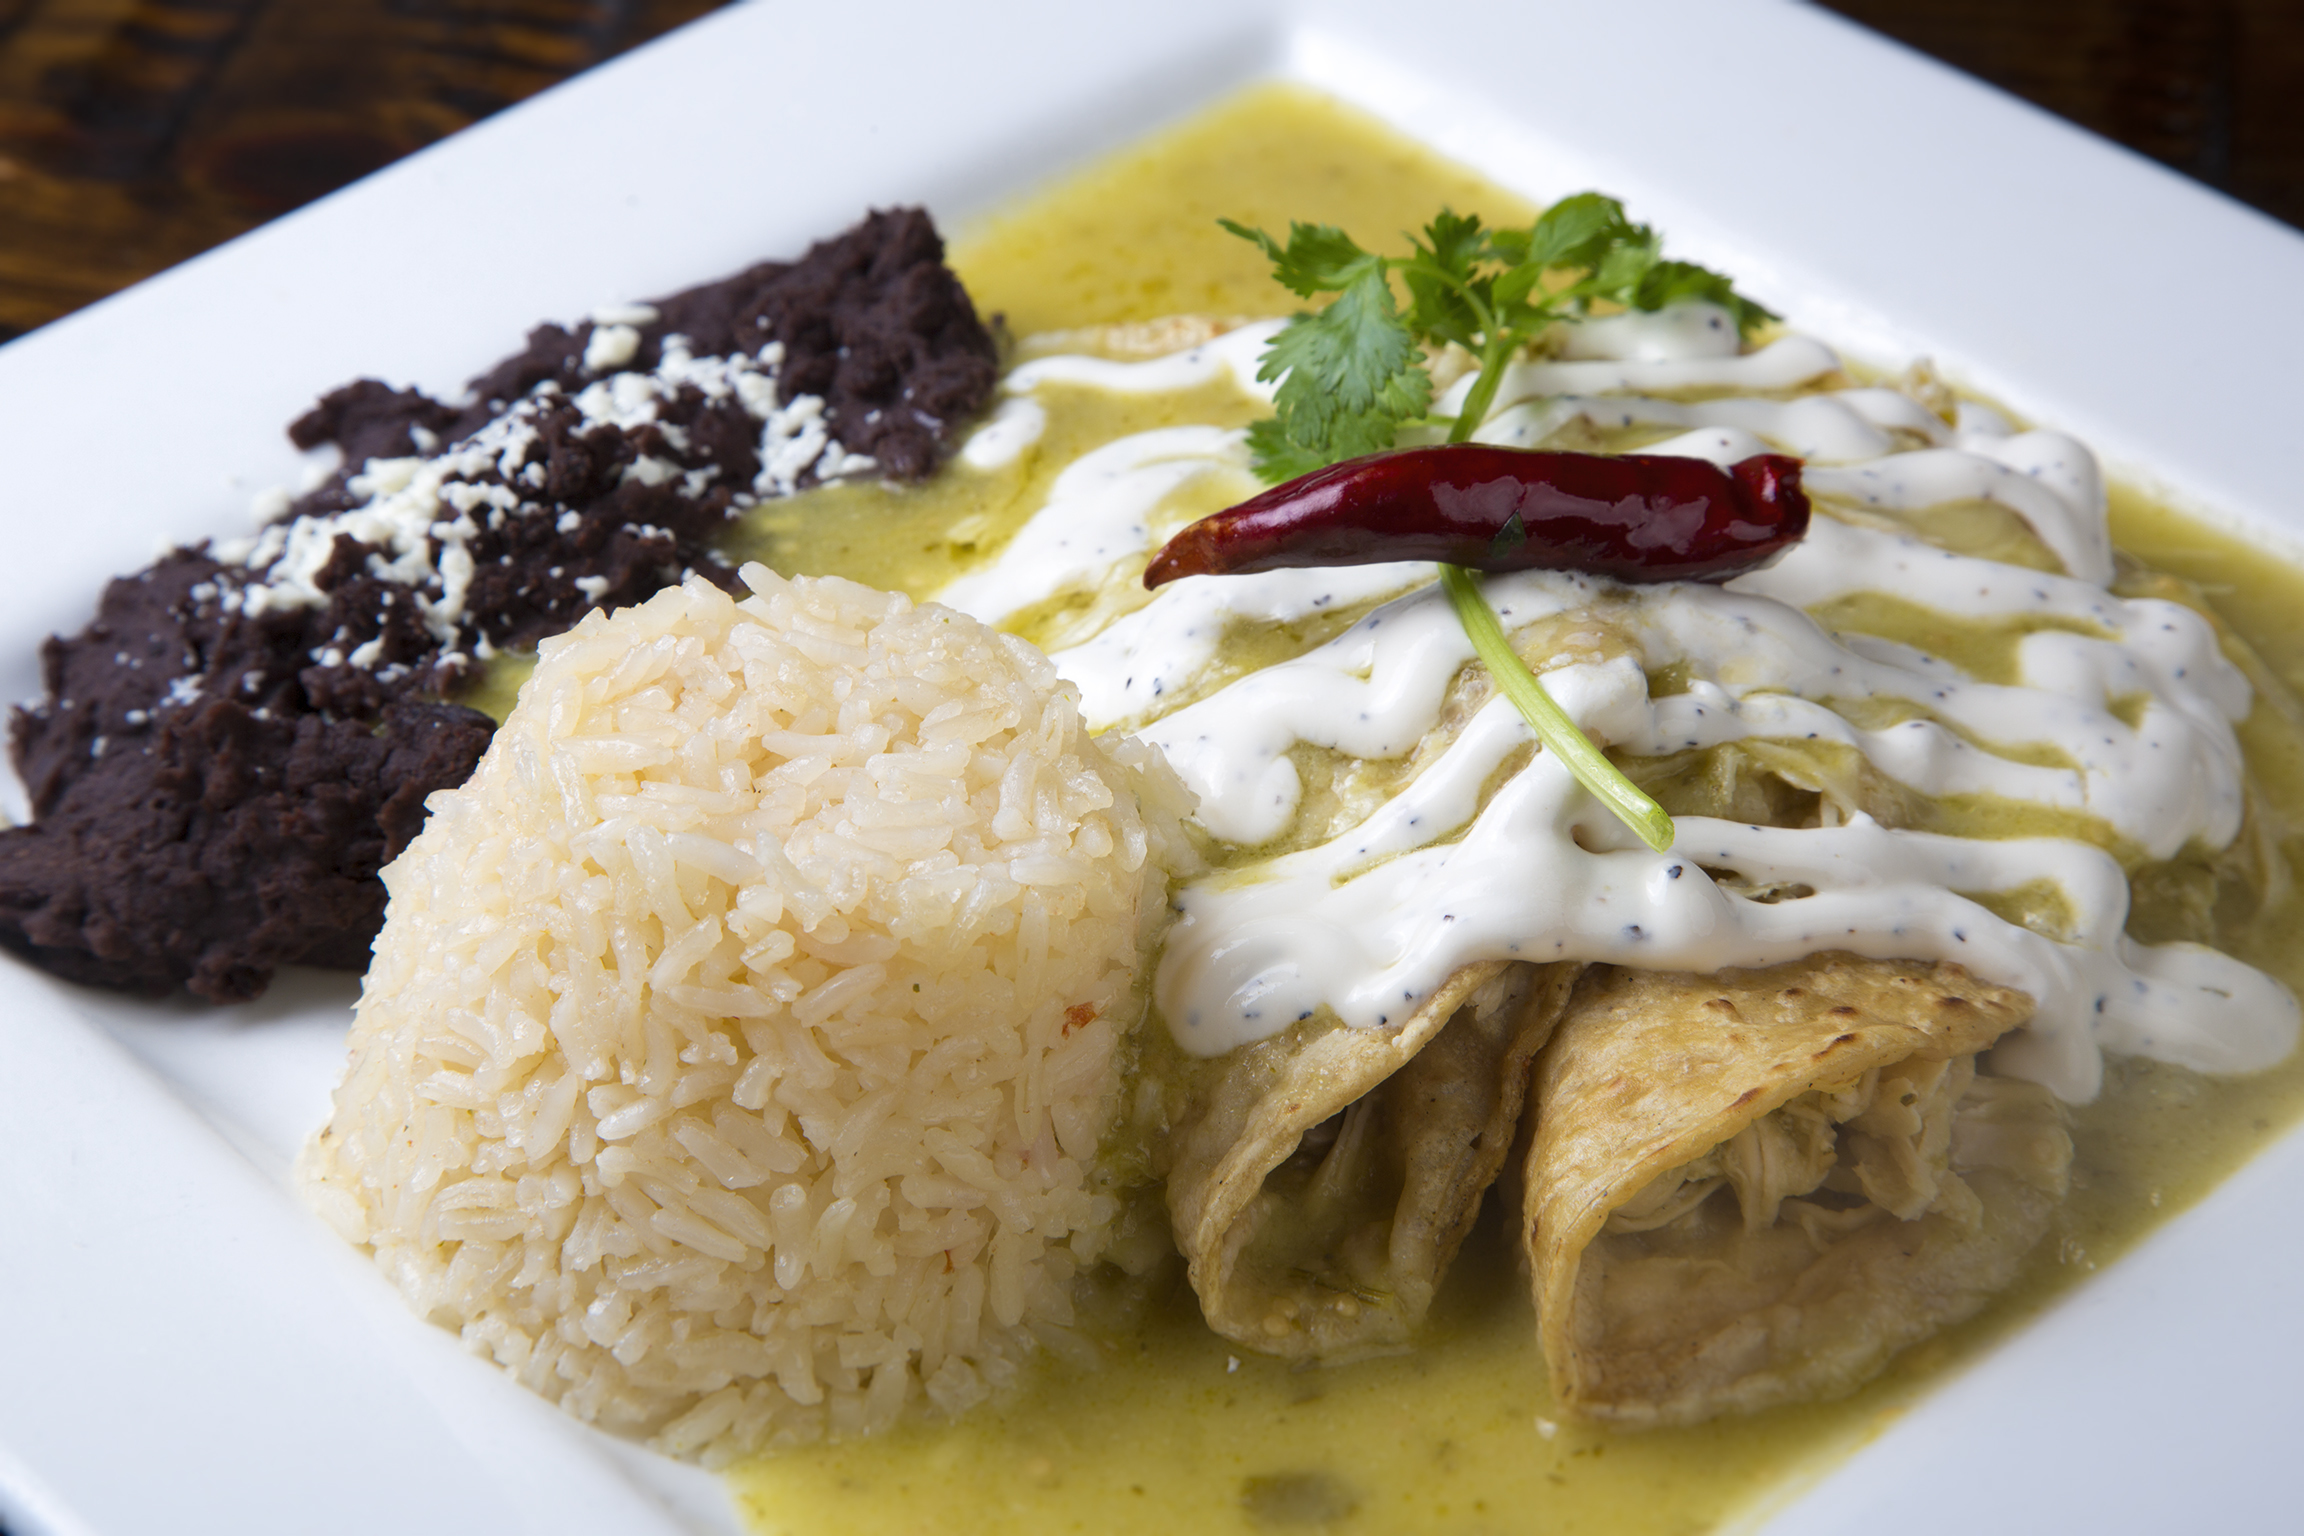 Two Enchiladas verde sit atop a white square plate drizzled with chipotle cream and verde sauce. A cylindrical-shaped stack of Mexican rice sits beside the enchiladas with a dollop of refried beans behind it.